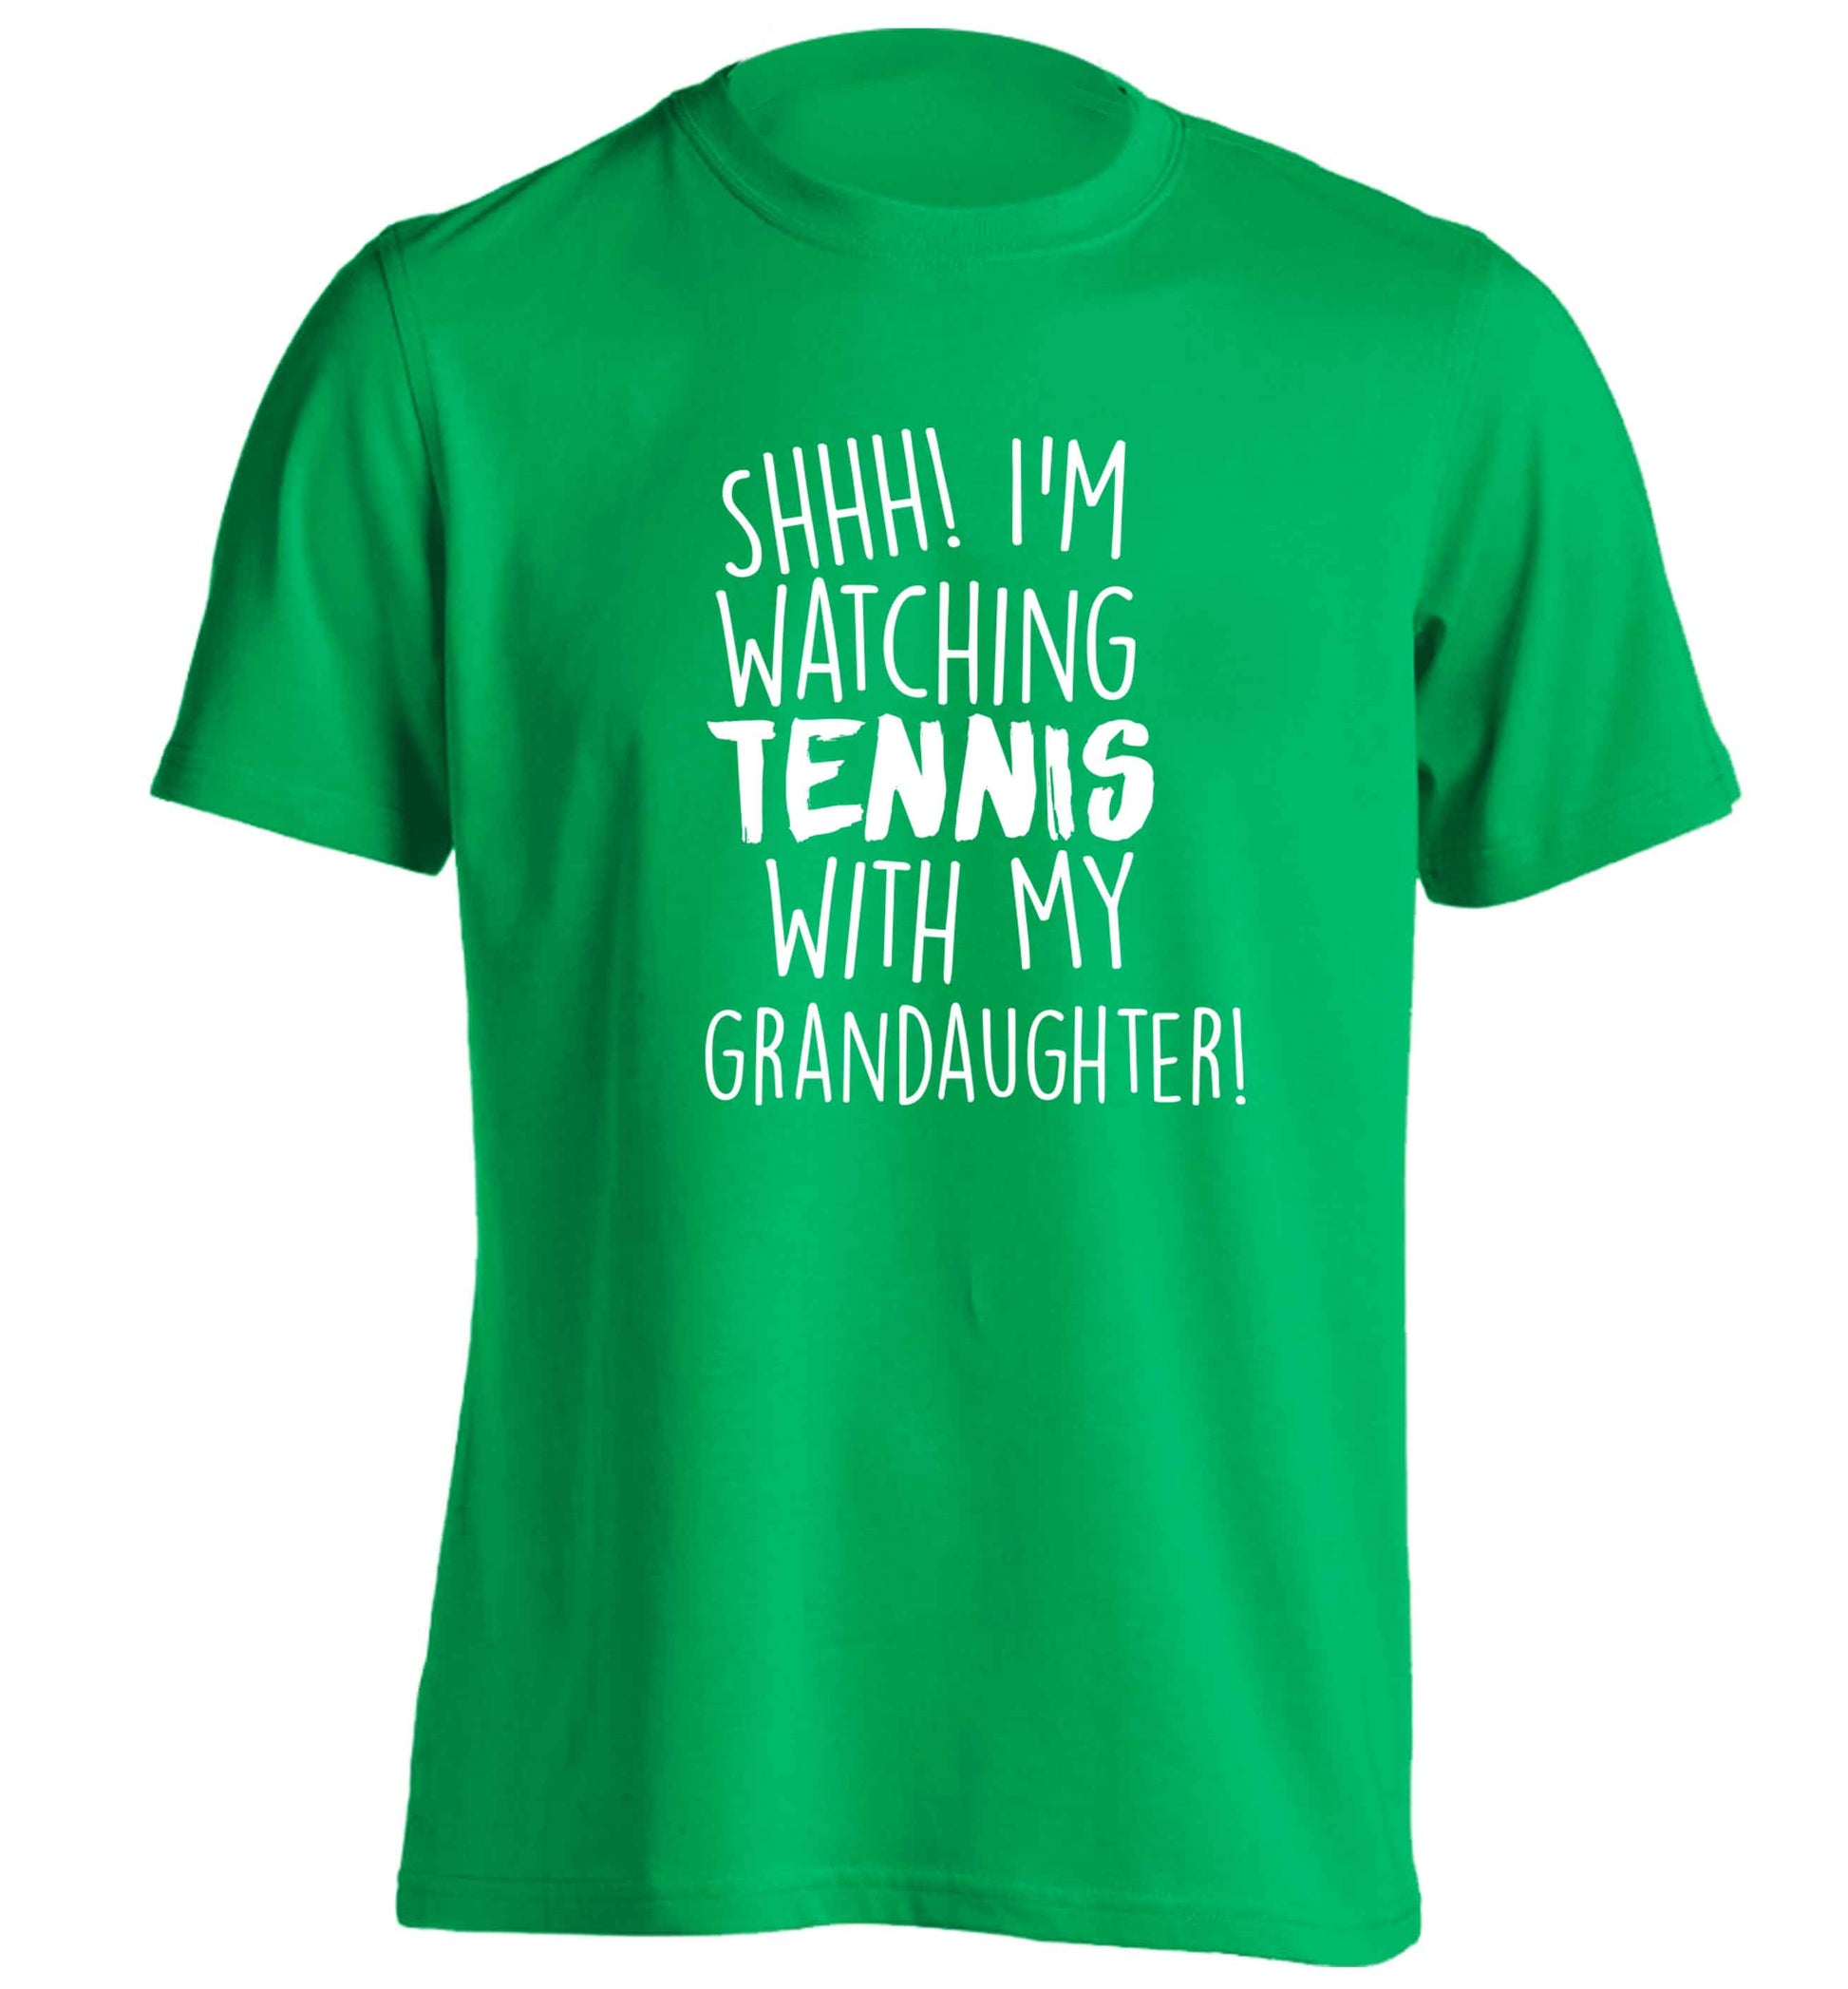 Shh! I'm watching tennis with my granddaughter! adults unisex green Tshirt 2XL